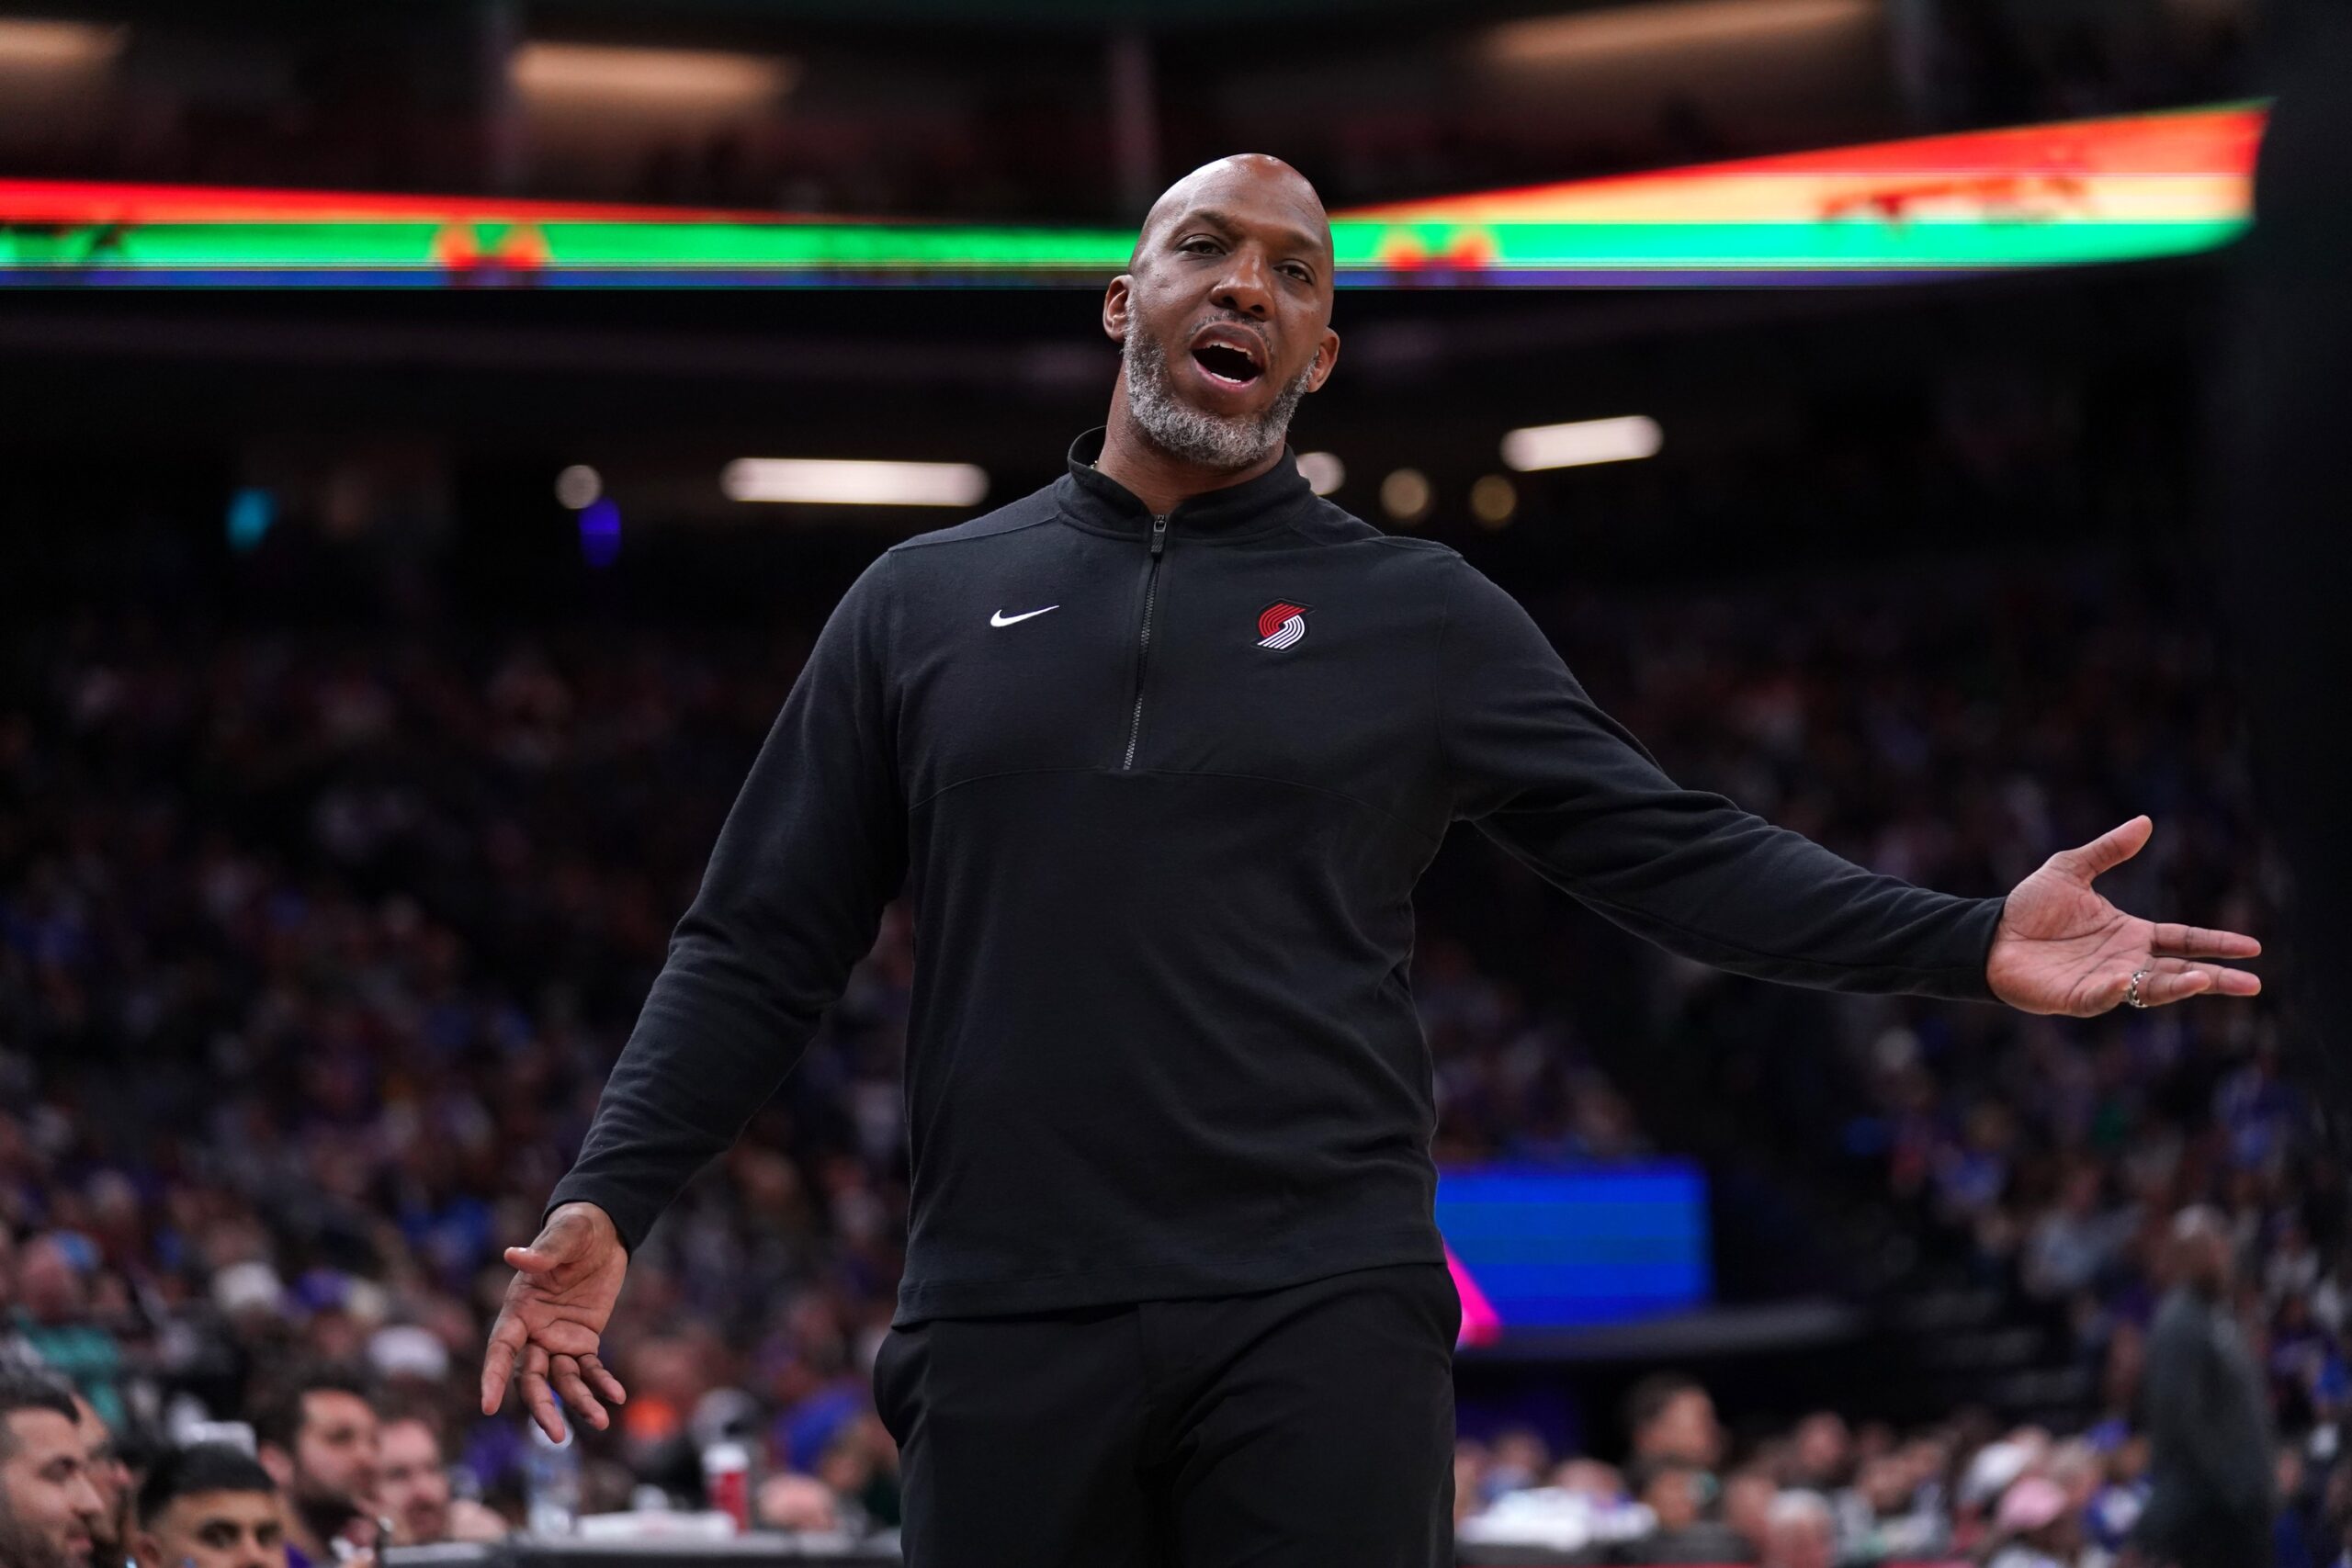 The Blazers have made major changes to Chauncey Billups' coaching staff.